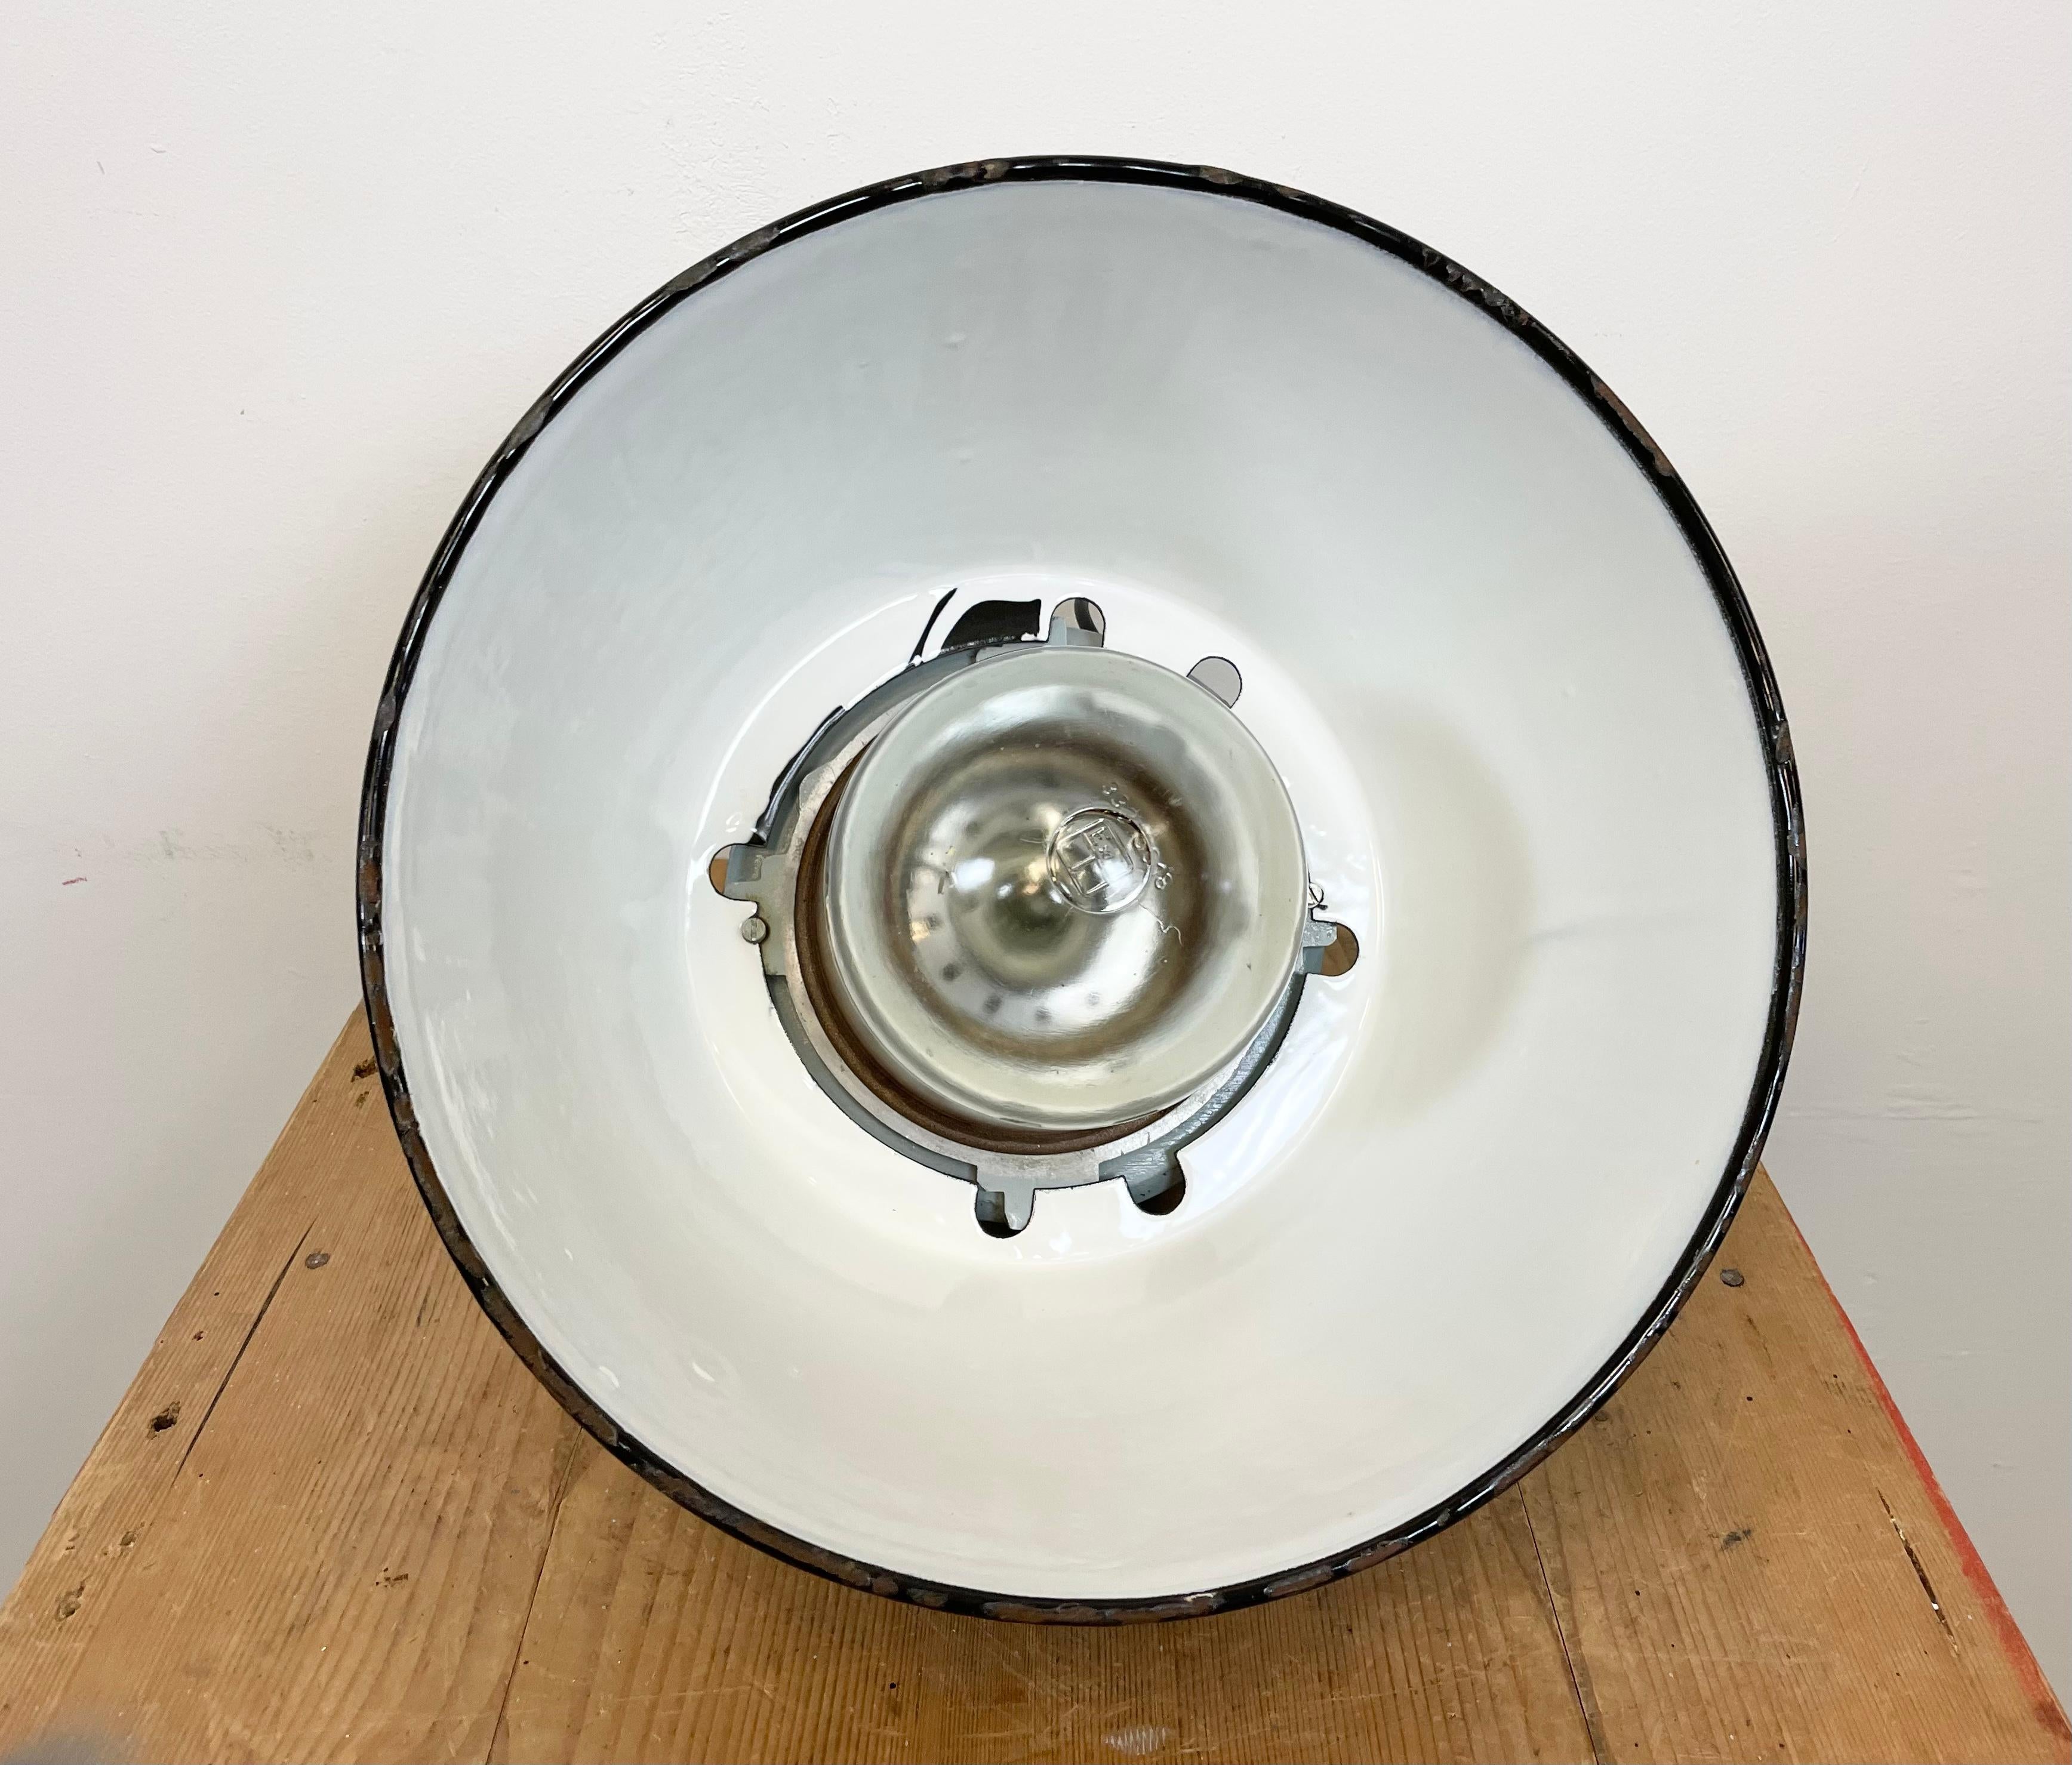 Grey Explosion Proof Lamp with Black Enameled Shade, 1970s For Sale 4